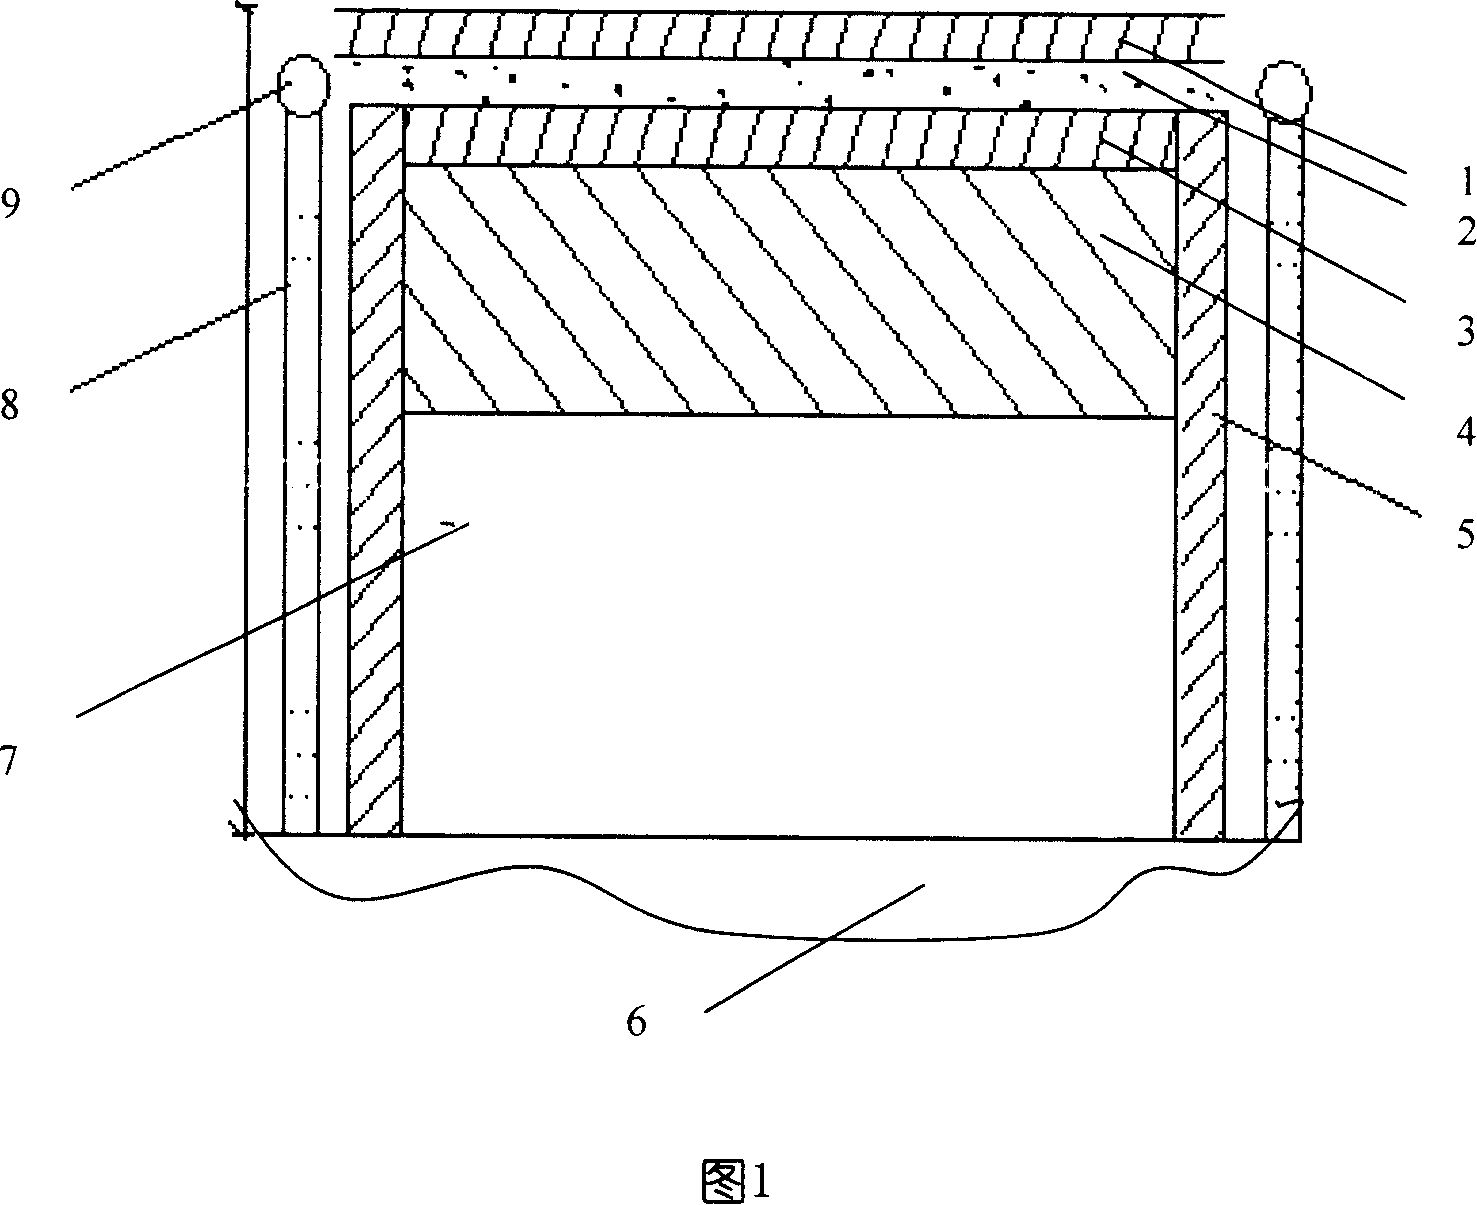 Treatment method for thick collapsed loess foundation